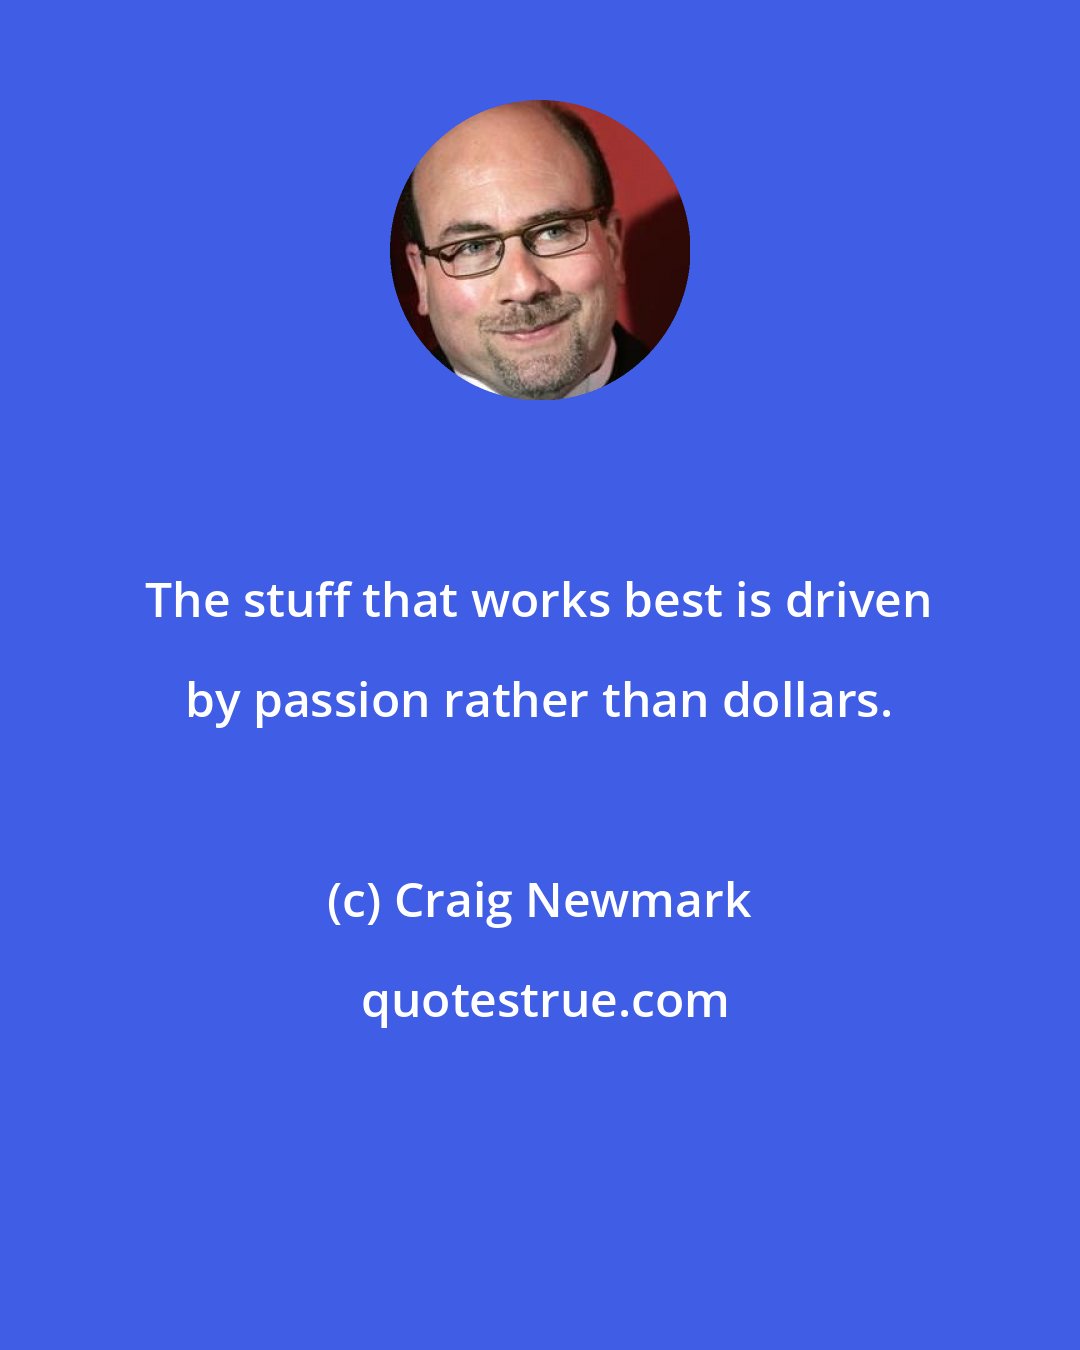 Craig Newmark: The stuff that works best is driven by passion rather than dollars.